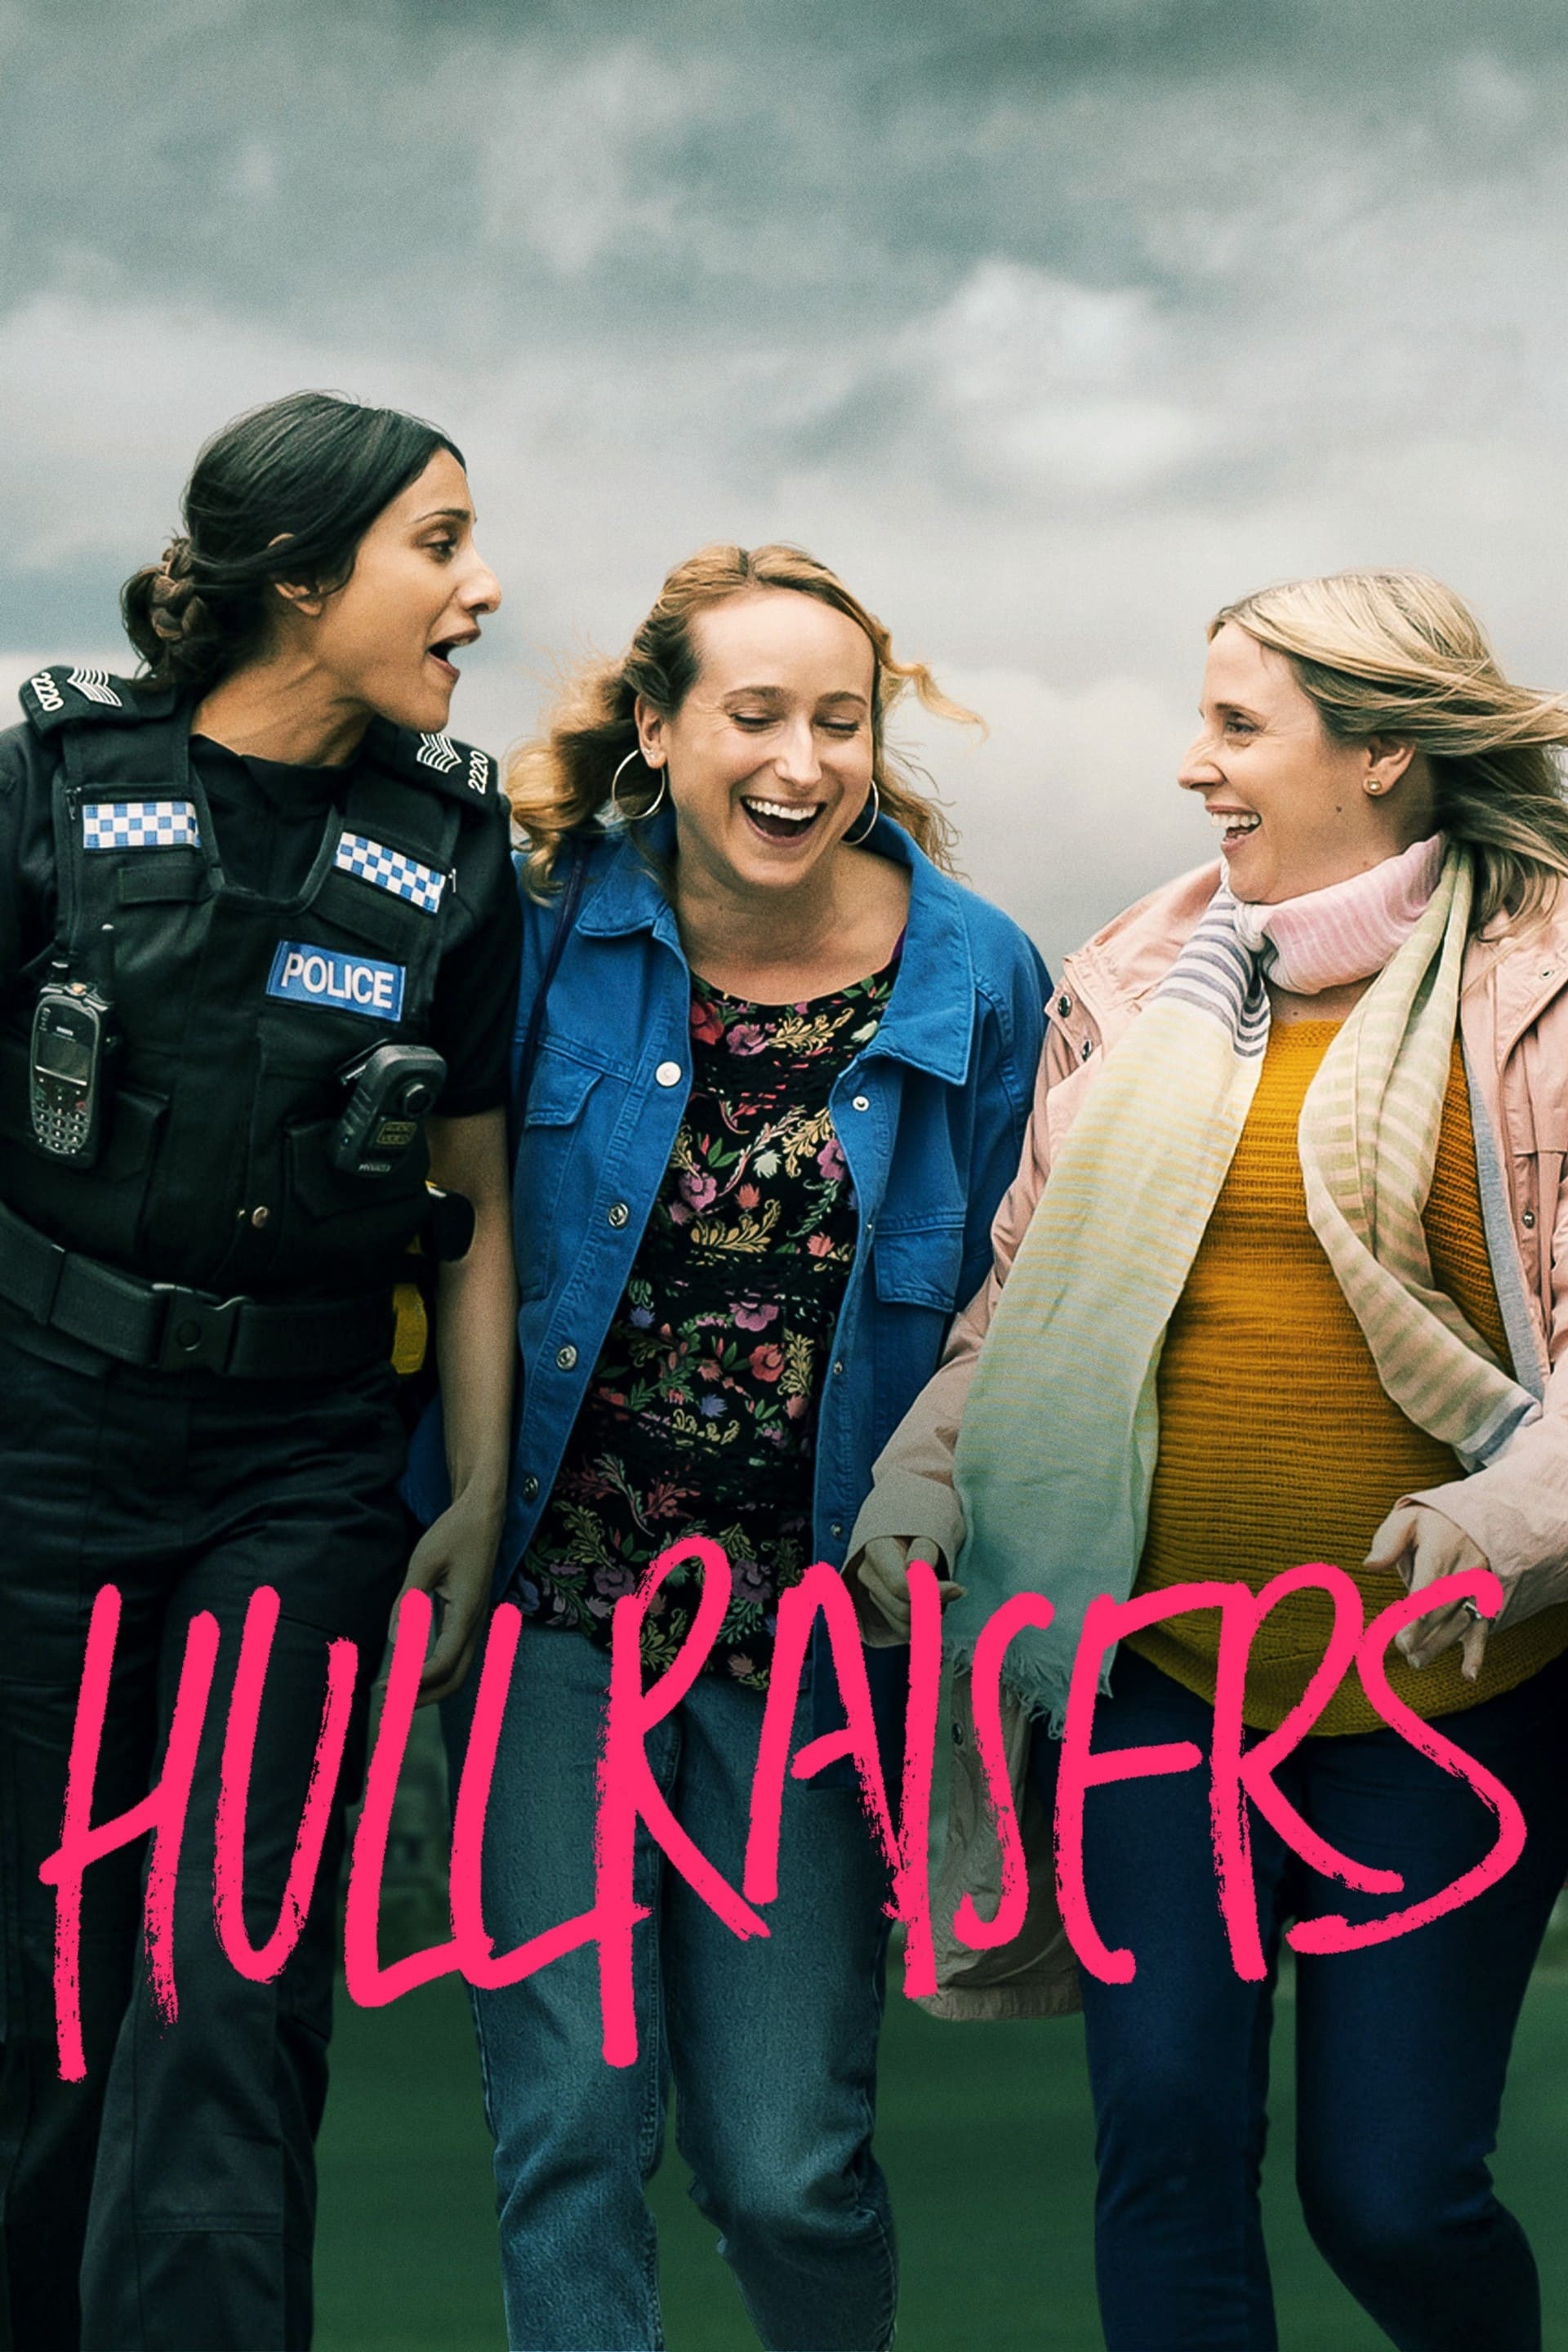 Hullraisers TV Shows About Child